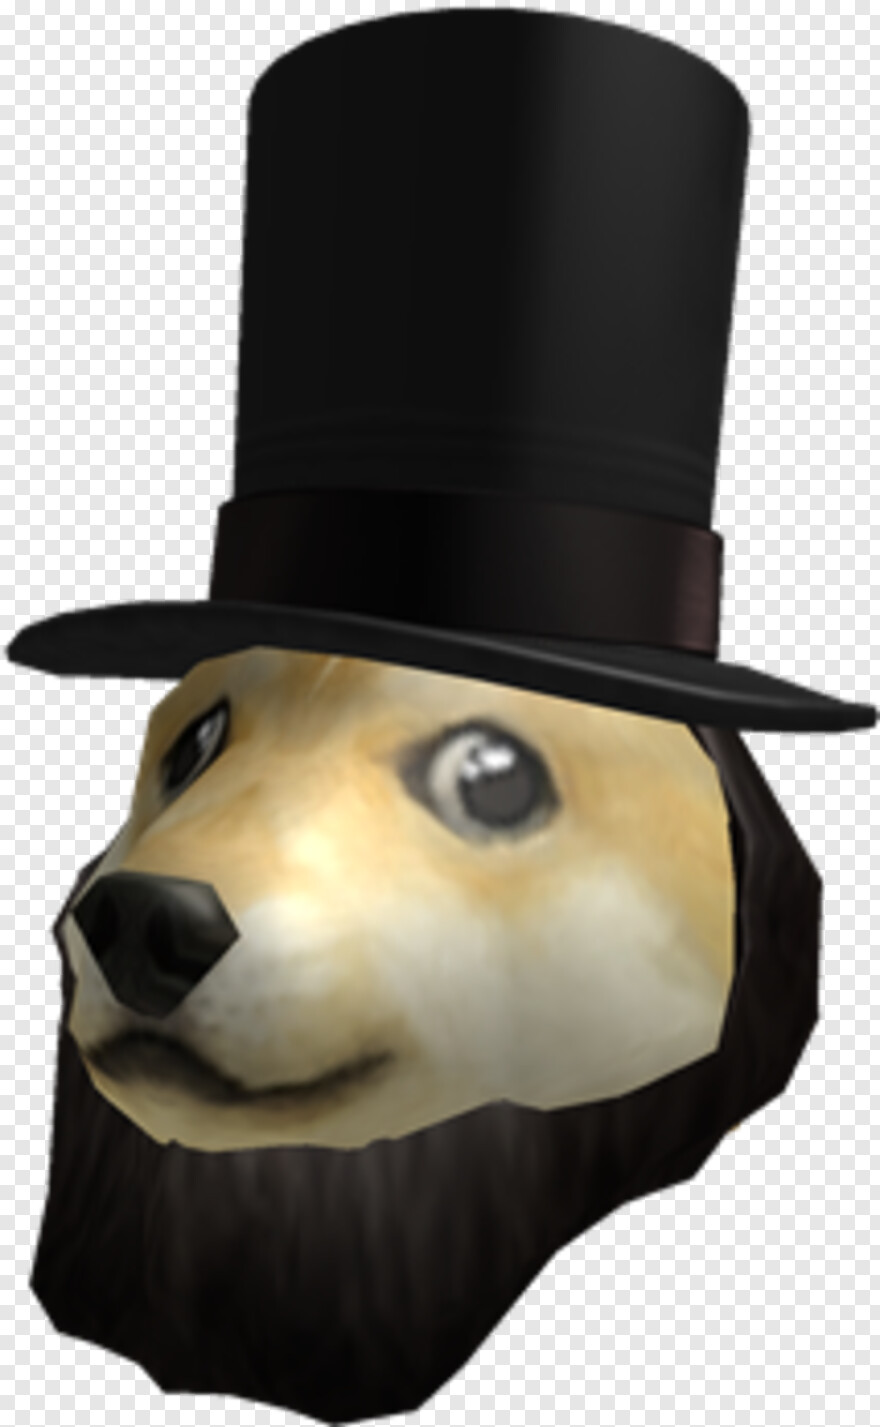 Doge Head Husky Buy Now Button Artwork Doge Tumblr Stickers 501311 Free Icon Library - binary doge roblox